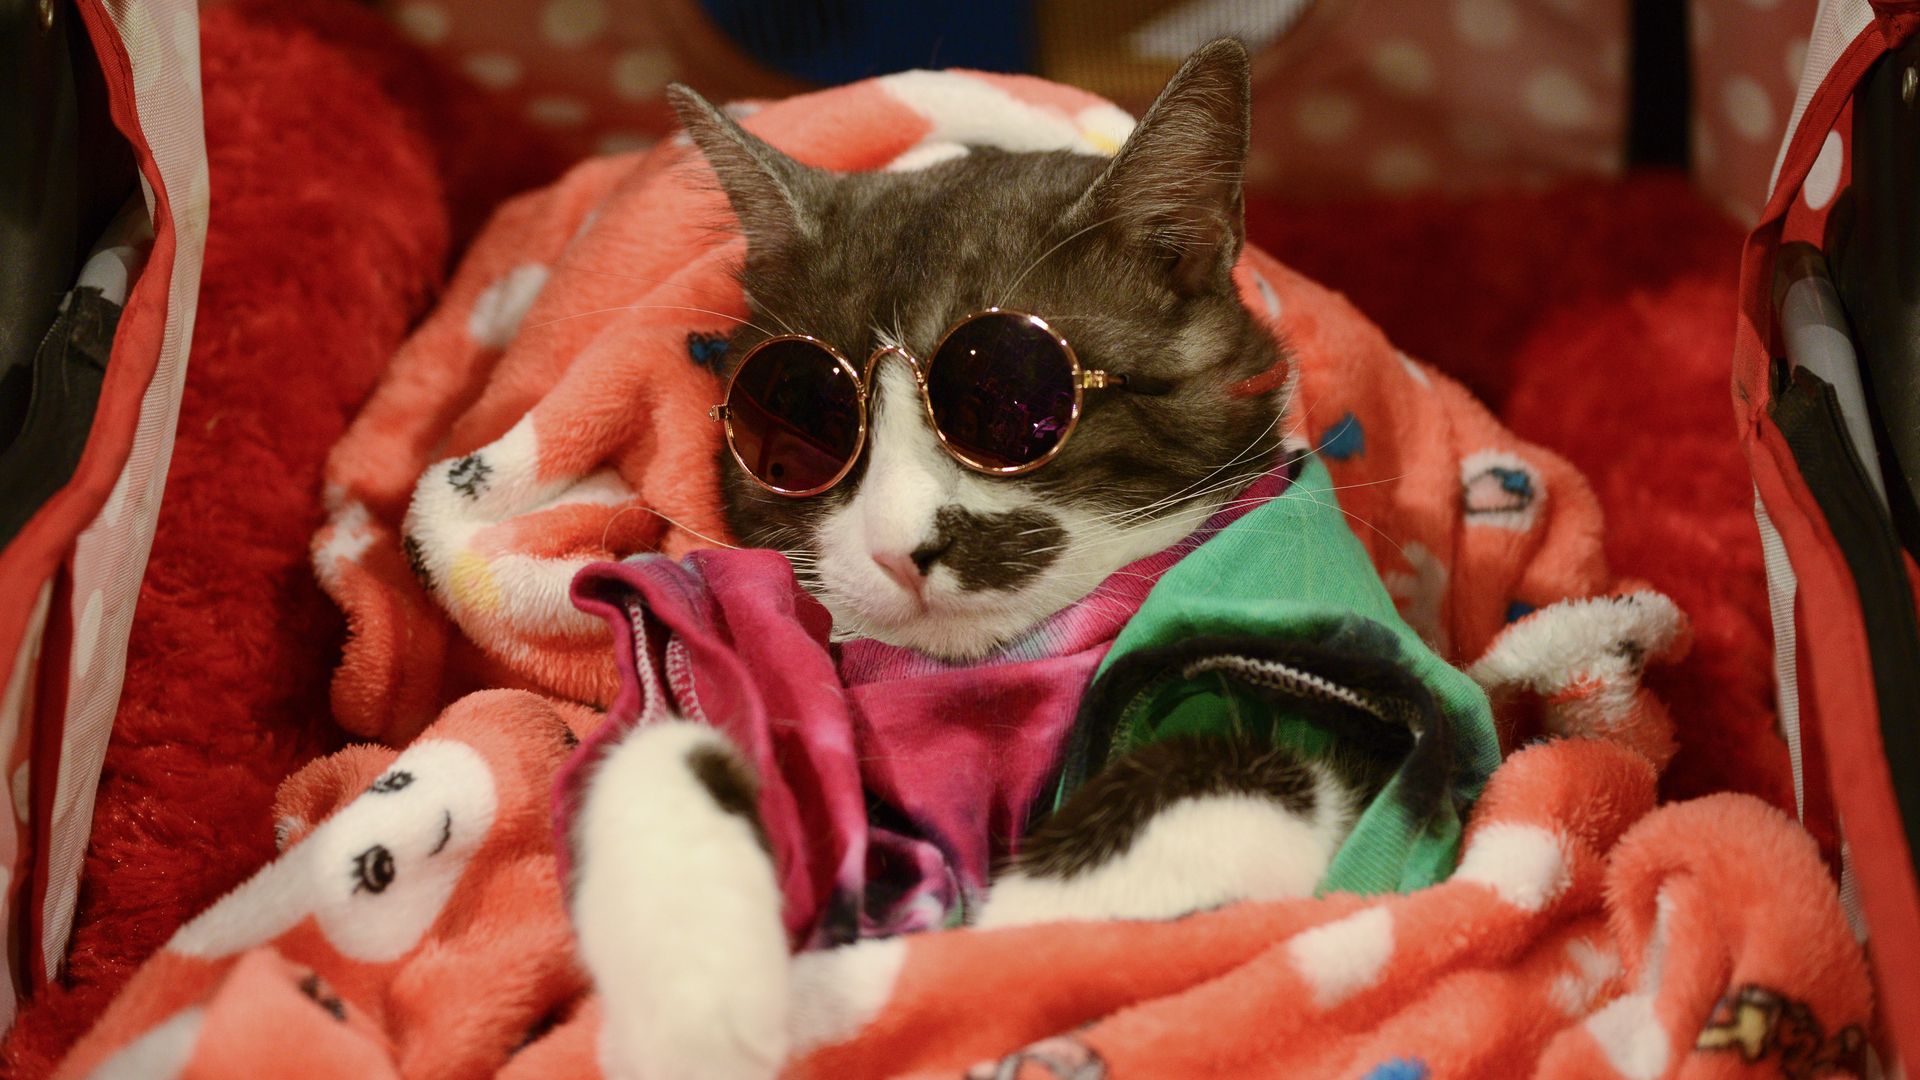 A bespectacled cat in fancy digs sleeps during a cat show.